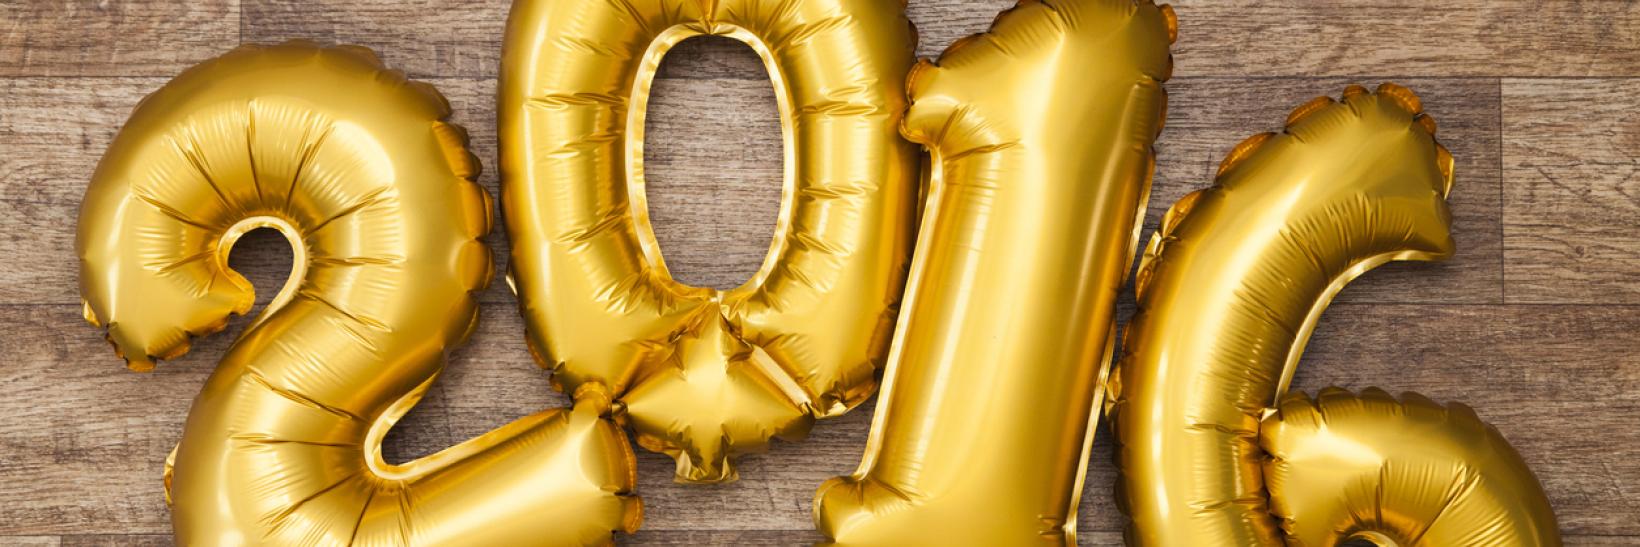 Balloons that spell out 2016.